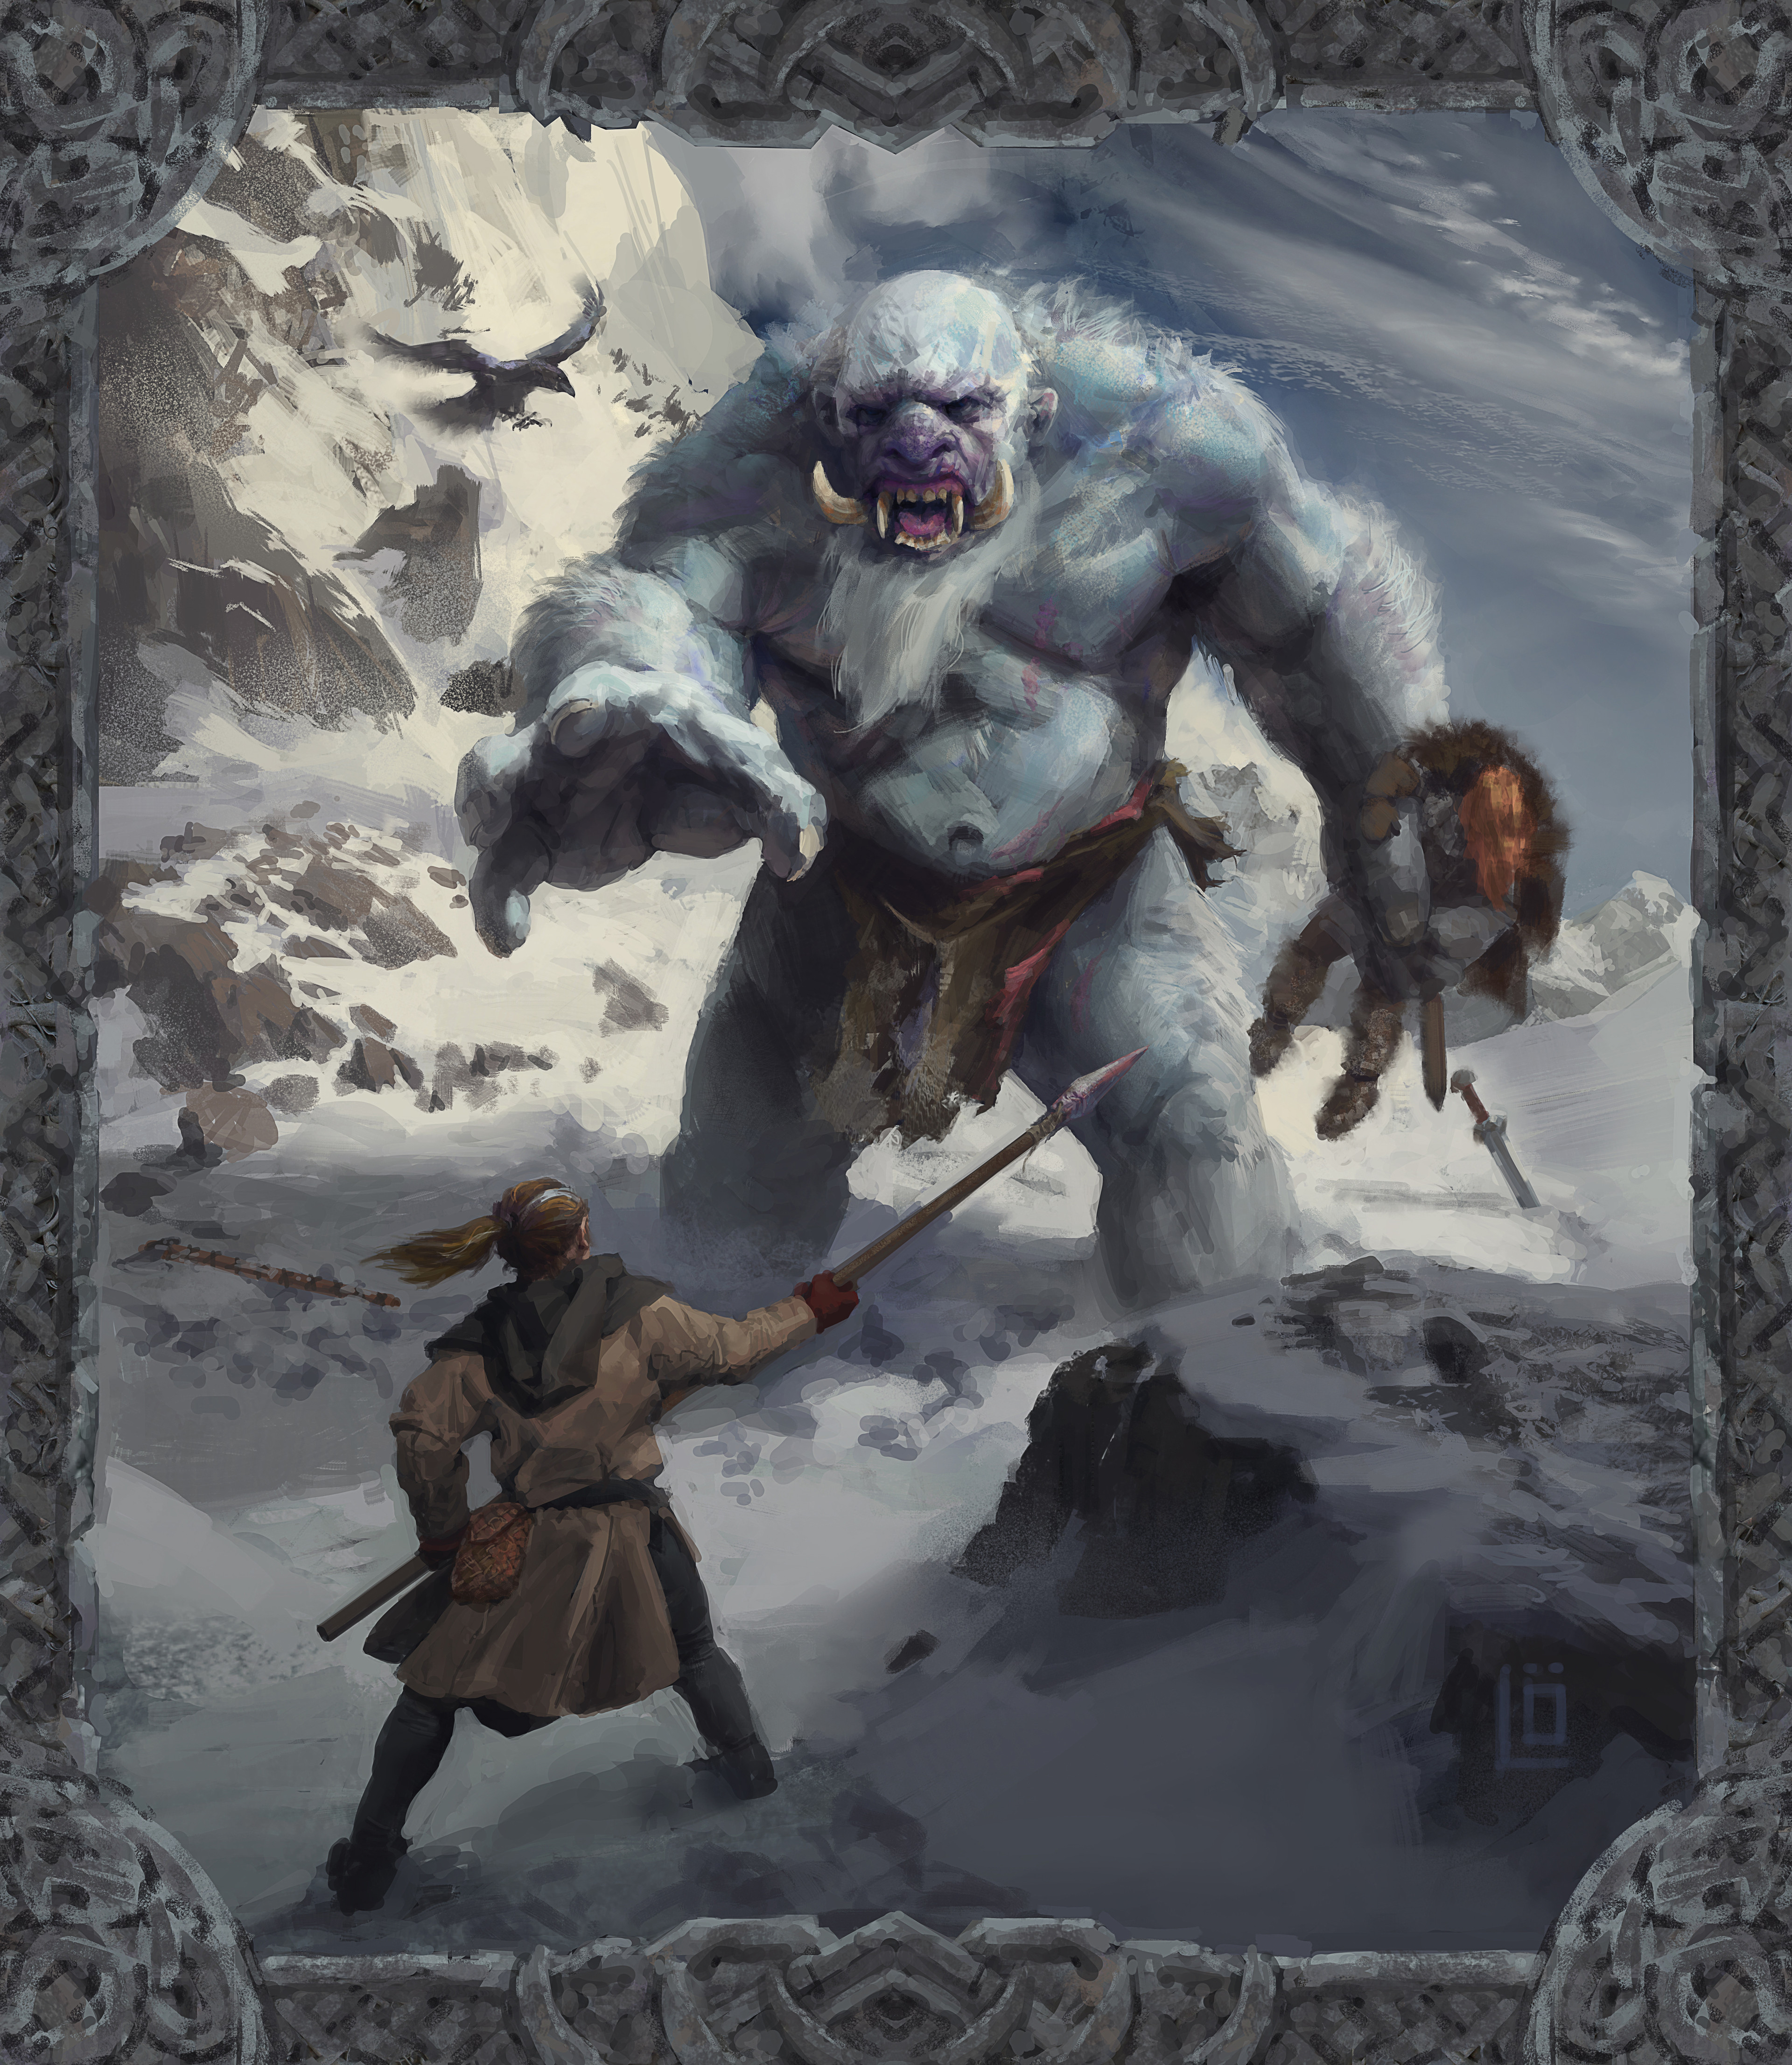 Jenuaran bravely faces off against the Ice Troll together with her raven. Their valkyrian companion struggles to break free in his ice cold grip.